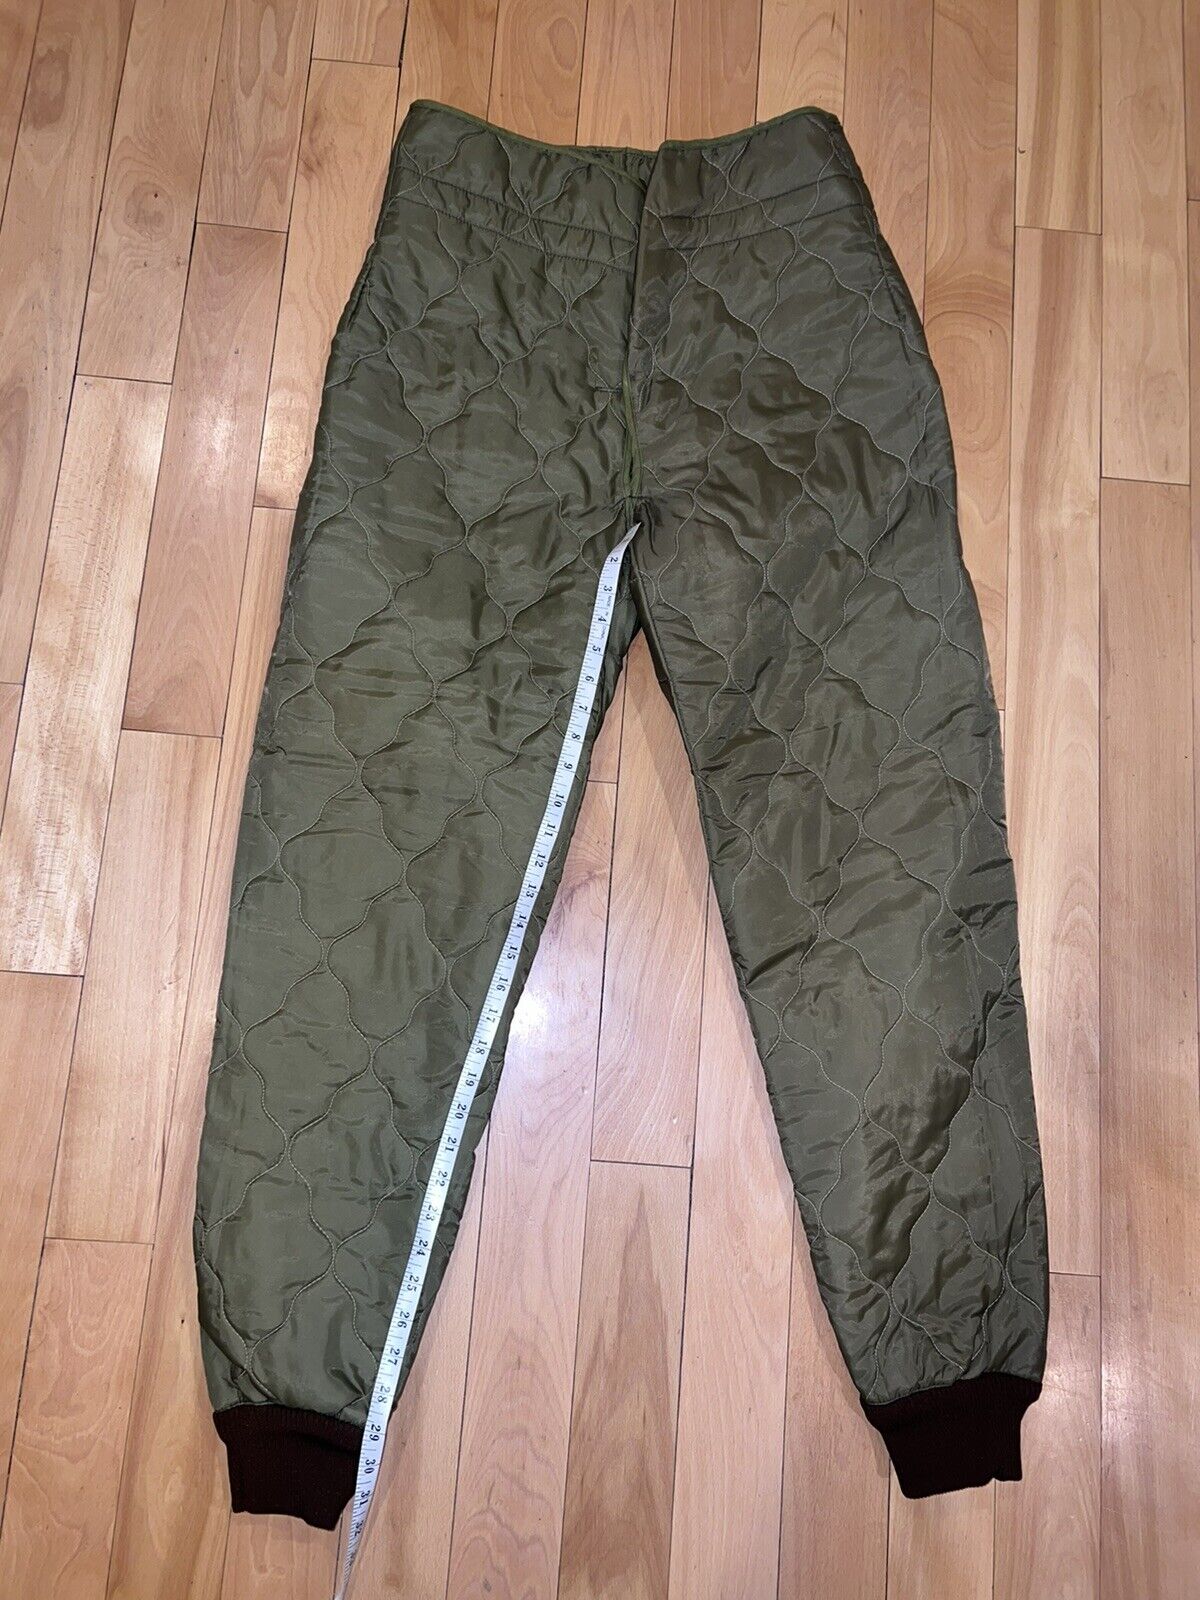 Ozkn Prešov Czech Military Quilted￼ Insulated Pants Liner, Green, Sz Pictured